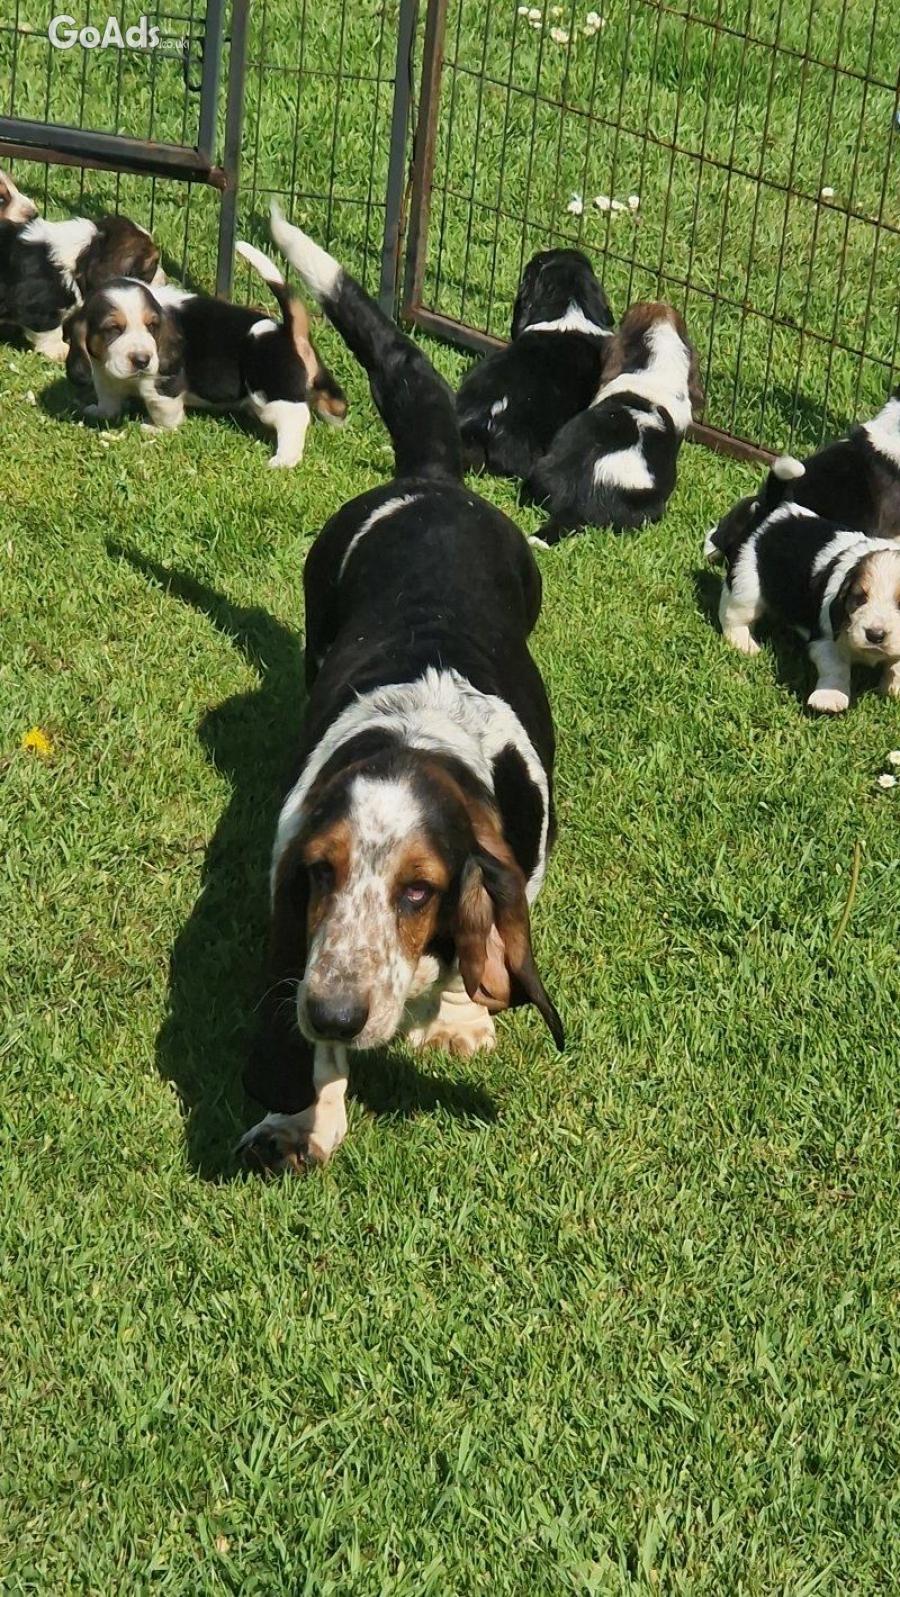 HEALTH TESTED KC BASSET HOUND PUPPIES FROM HEALTH TESTED PARENTS